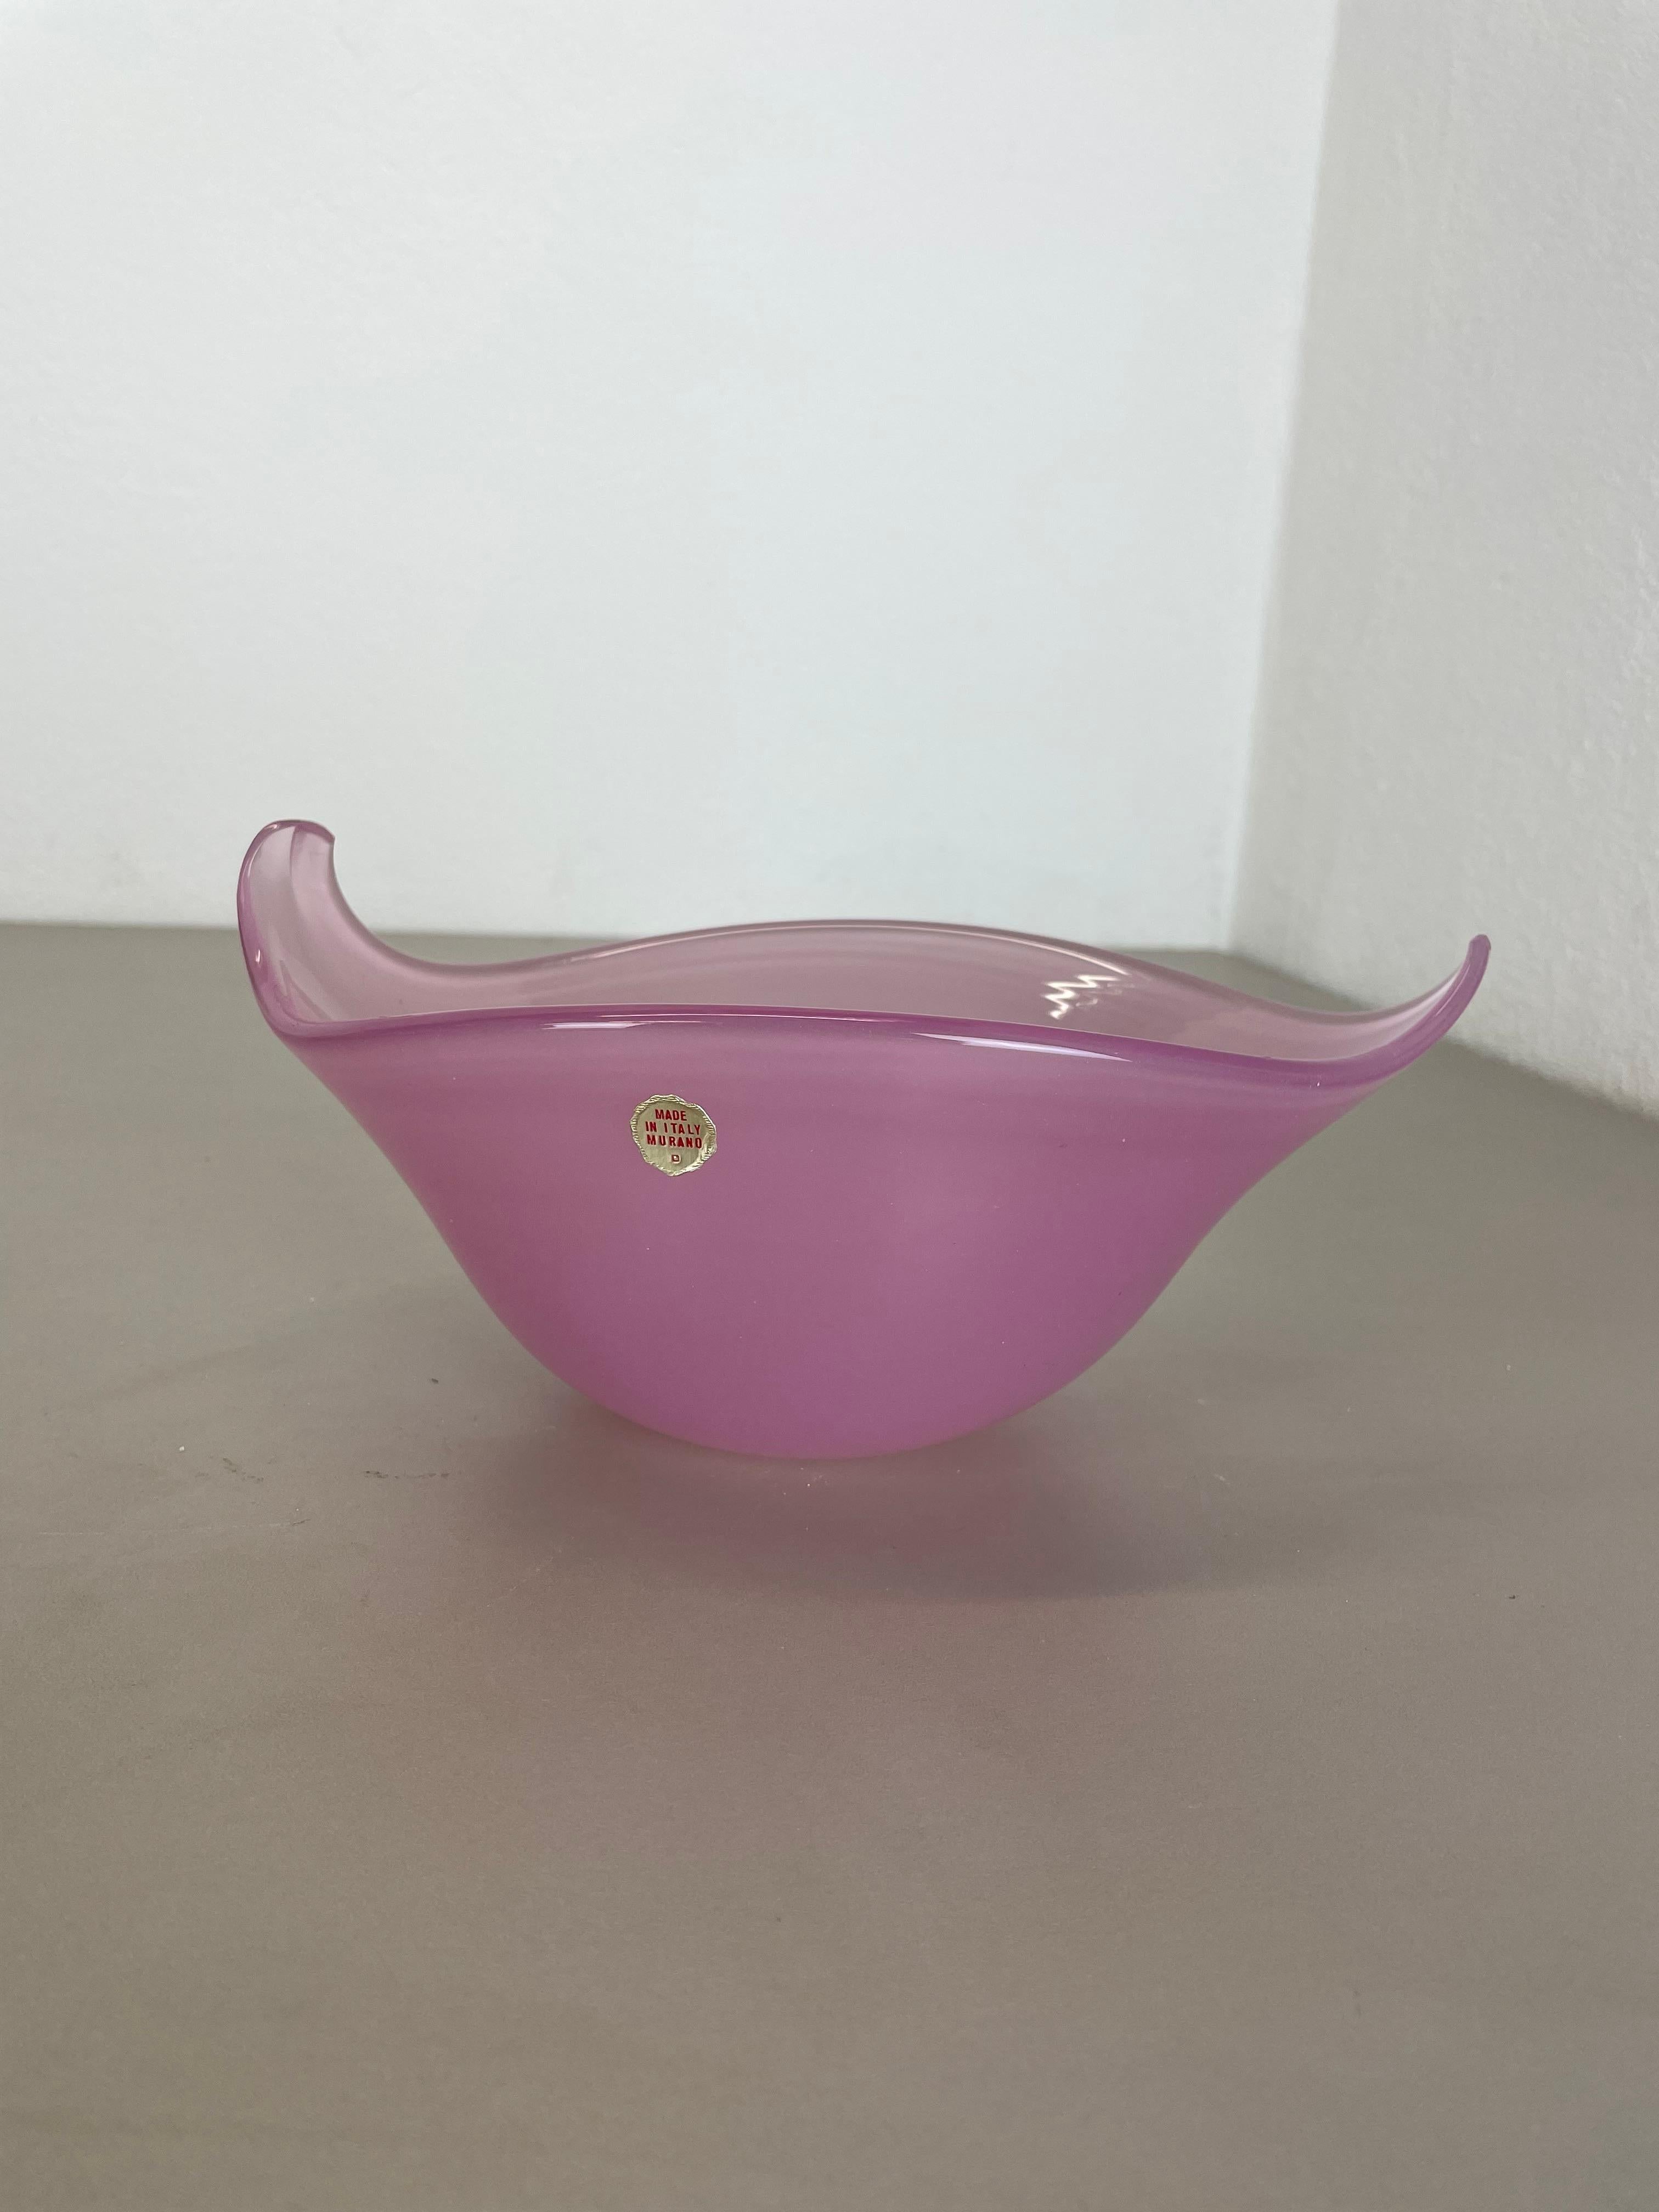 Article:

Murano glass shell element in pink tone


Origin:

Murano, Italy

Decade:

1970s

This original one of a kind glass shell was produced in the 1970s in Murano, Italy. This element is made of high quality Murano opaline glass and has a